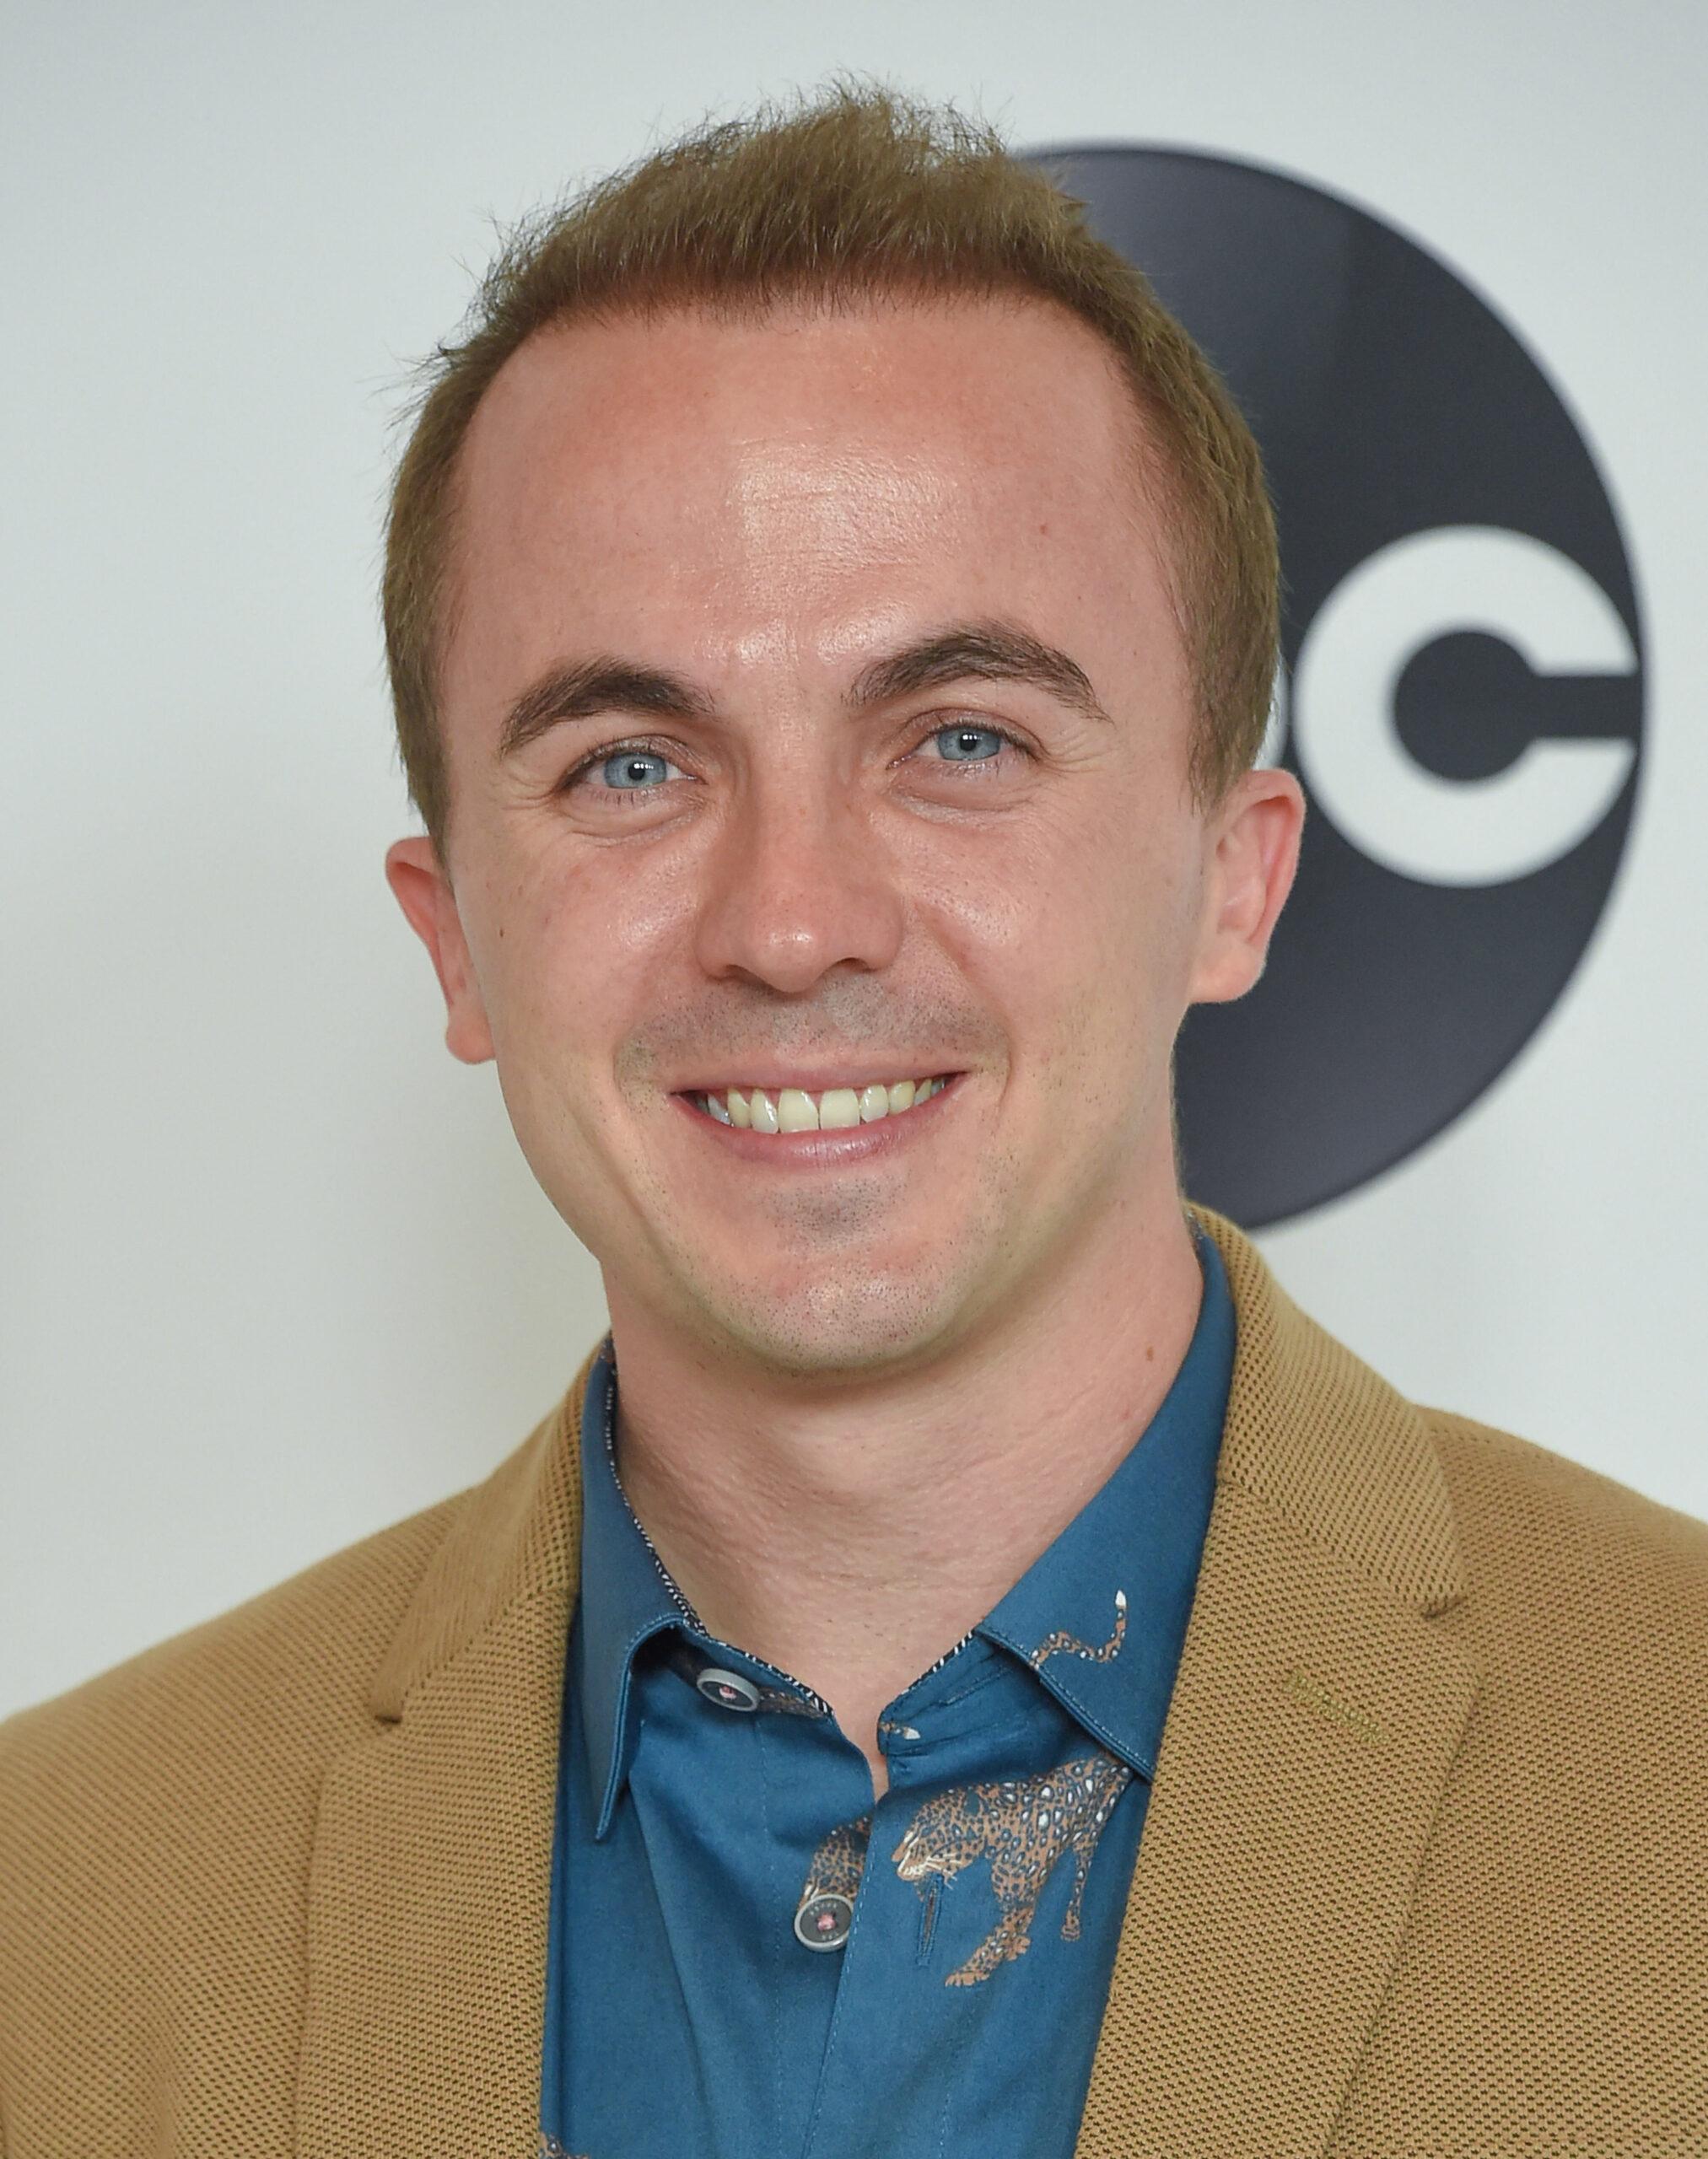 Frankie Muniz has retracted his bombshell accusations against the 'Malcom In The Middle' crew.